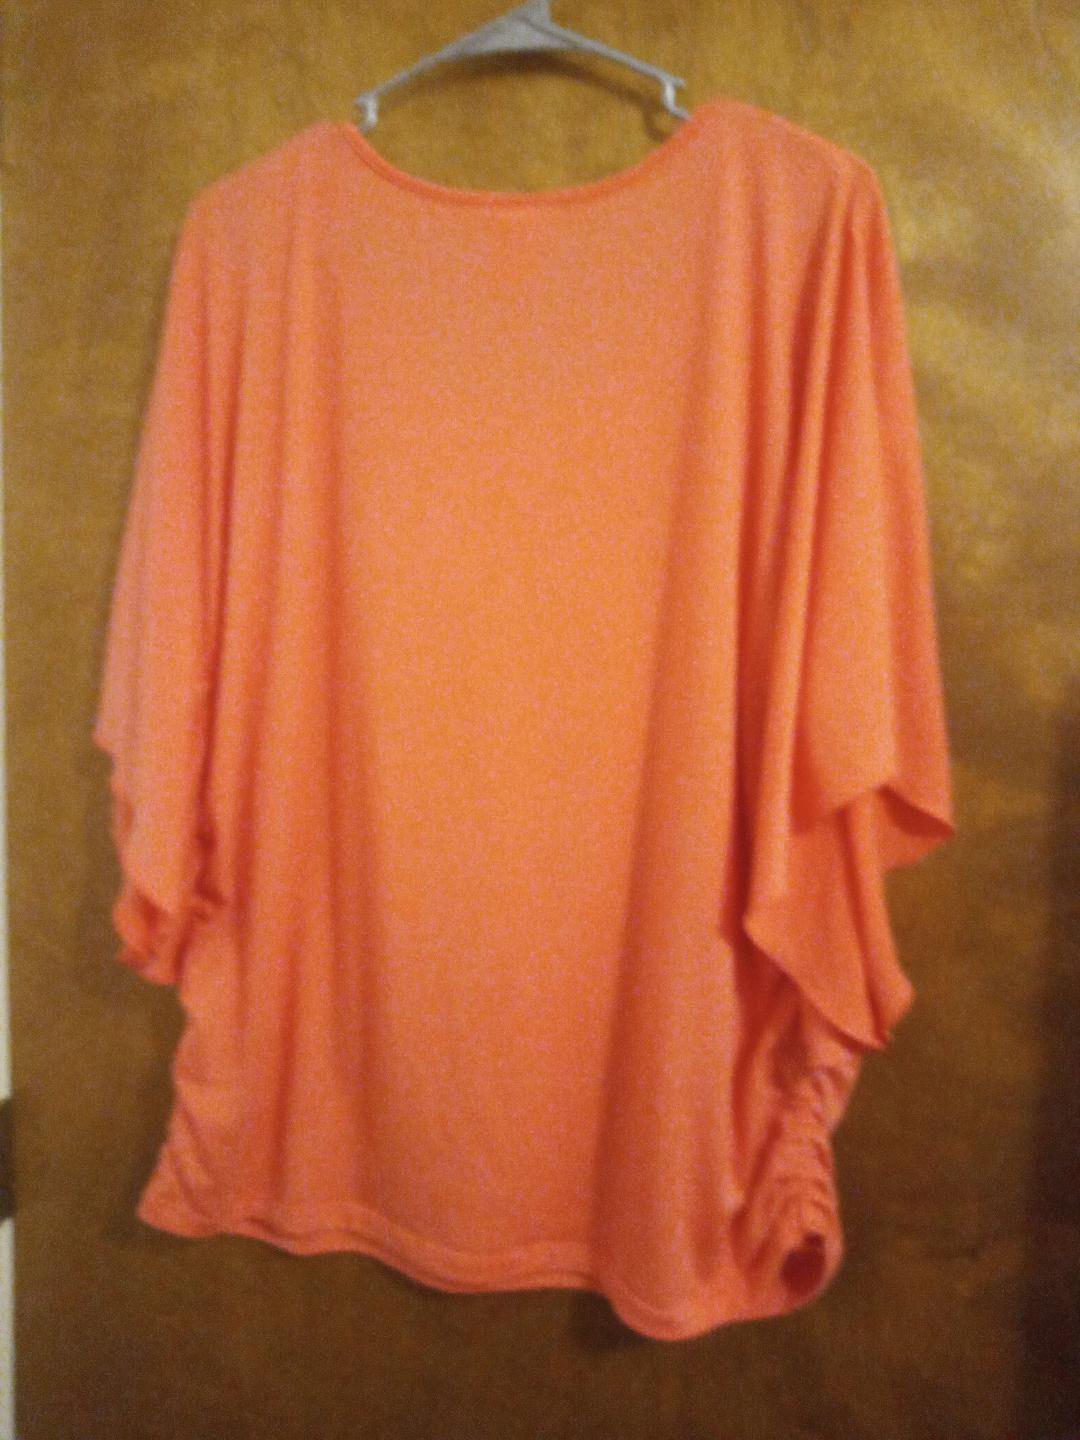 Women's Orange Blouse with Fancy Sleeves and Gathers at Both Sides